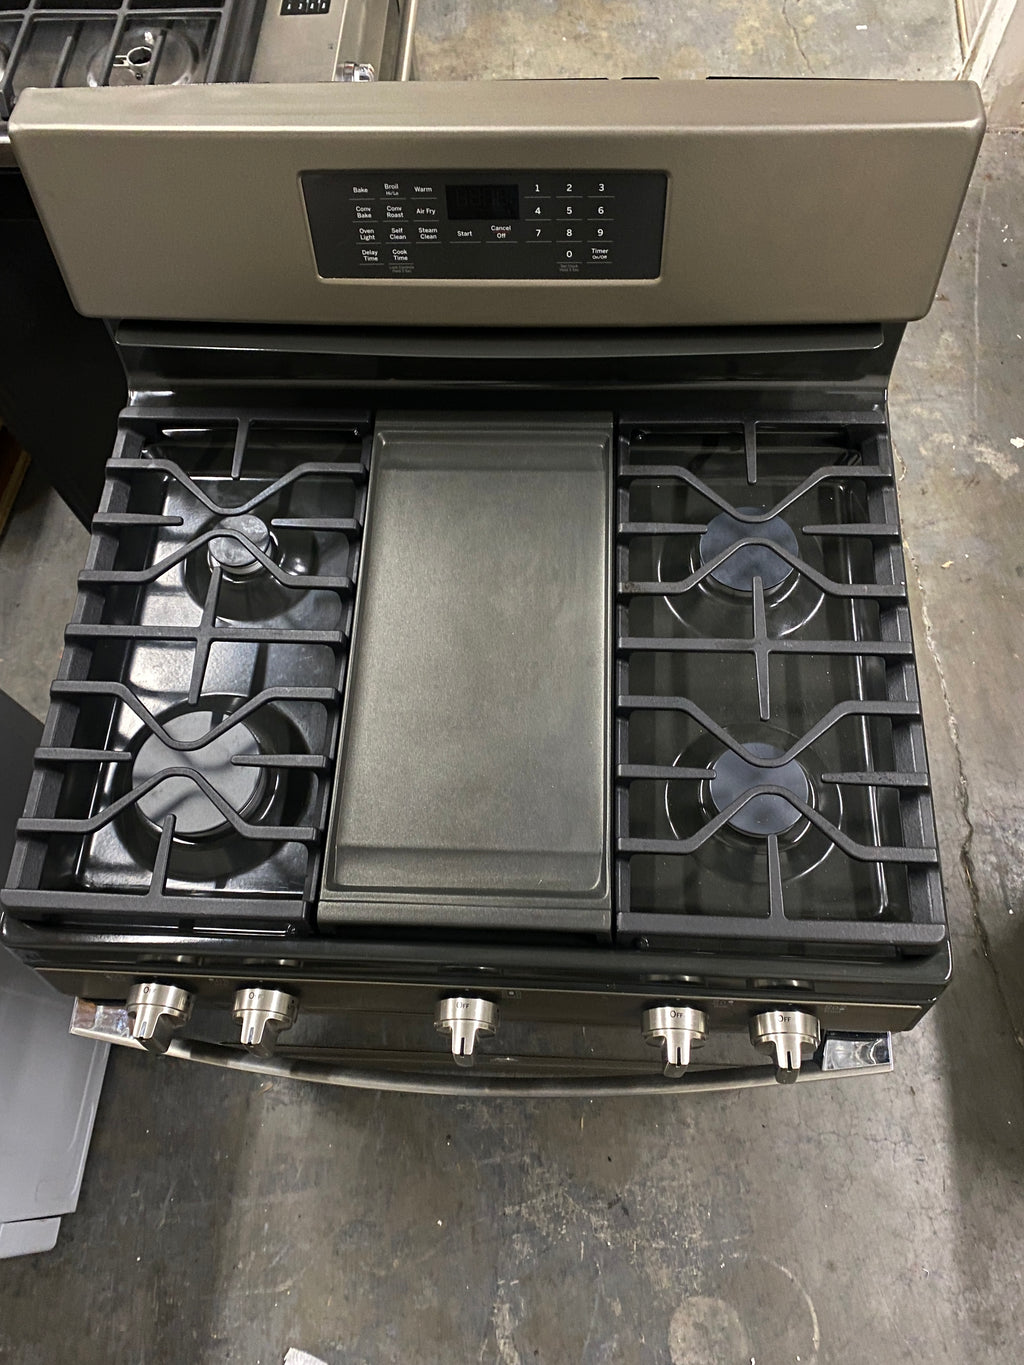 Bosch 800 Series HDS8055U 30 Inch Freestanding Dual Fuel Range with 5  Sealed Burners, 3.9 Cu. Ft. Oven Capacity, Continuous Grates, Self Clean